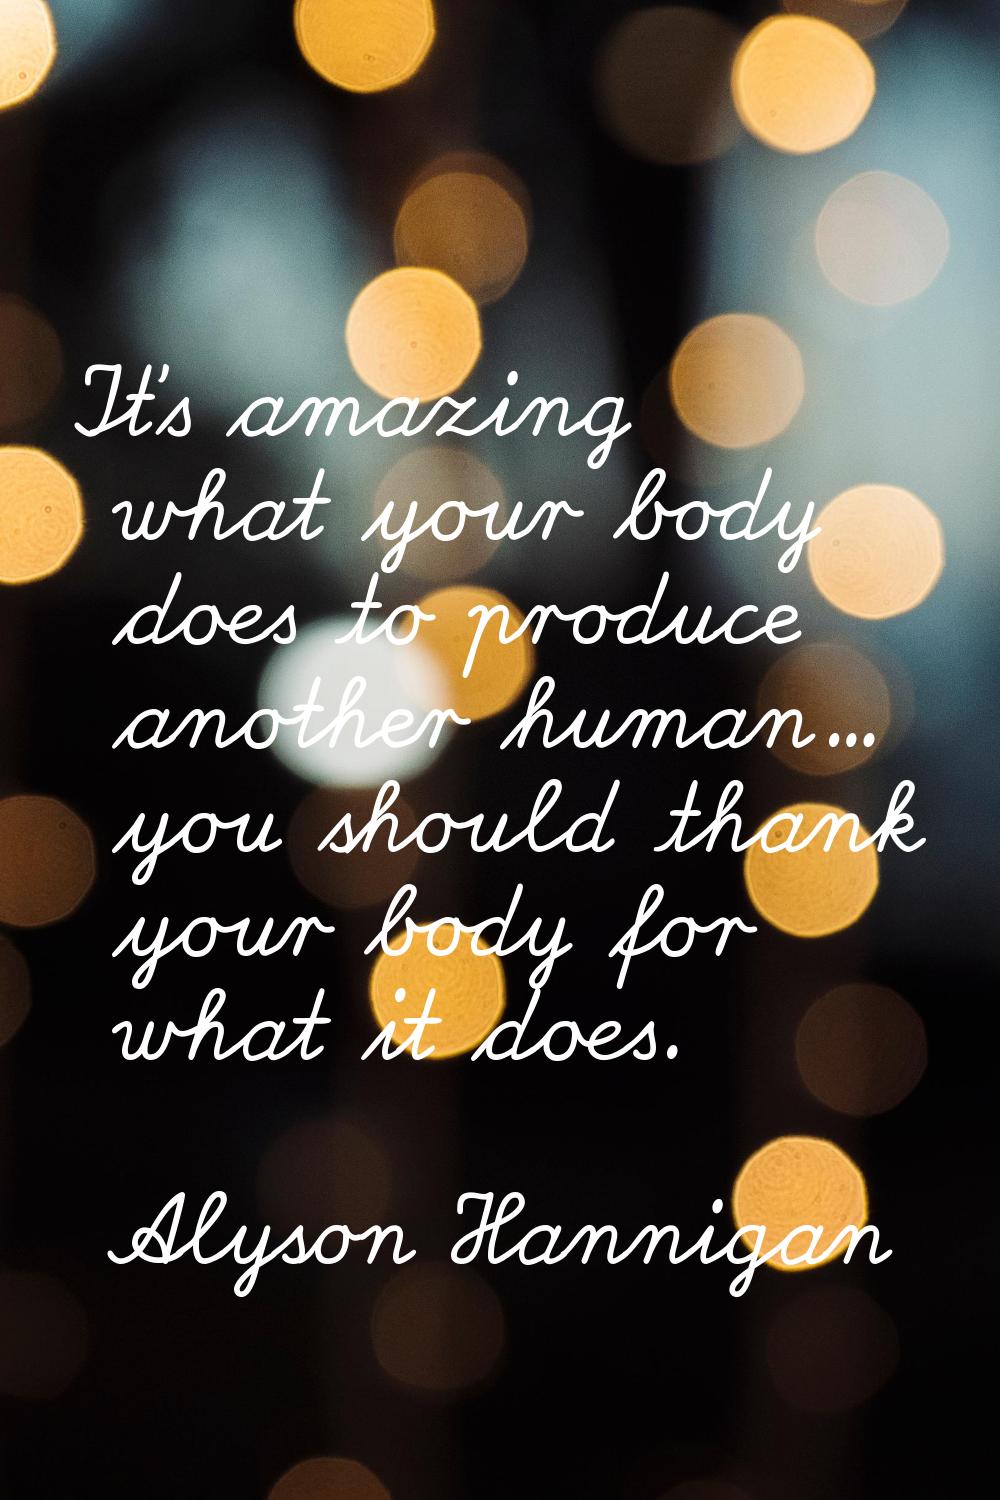 It's amazing what your body does to produce another human... you should thank your body for what it